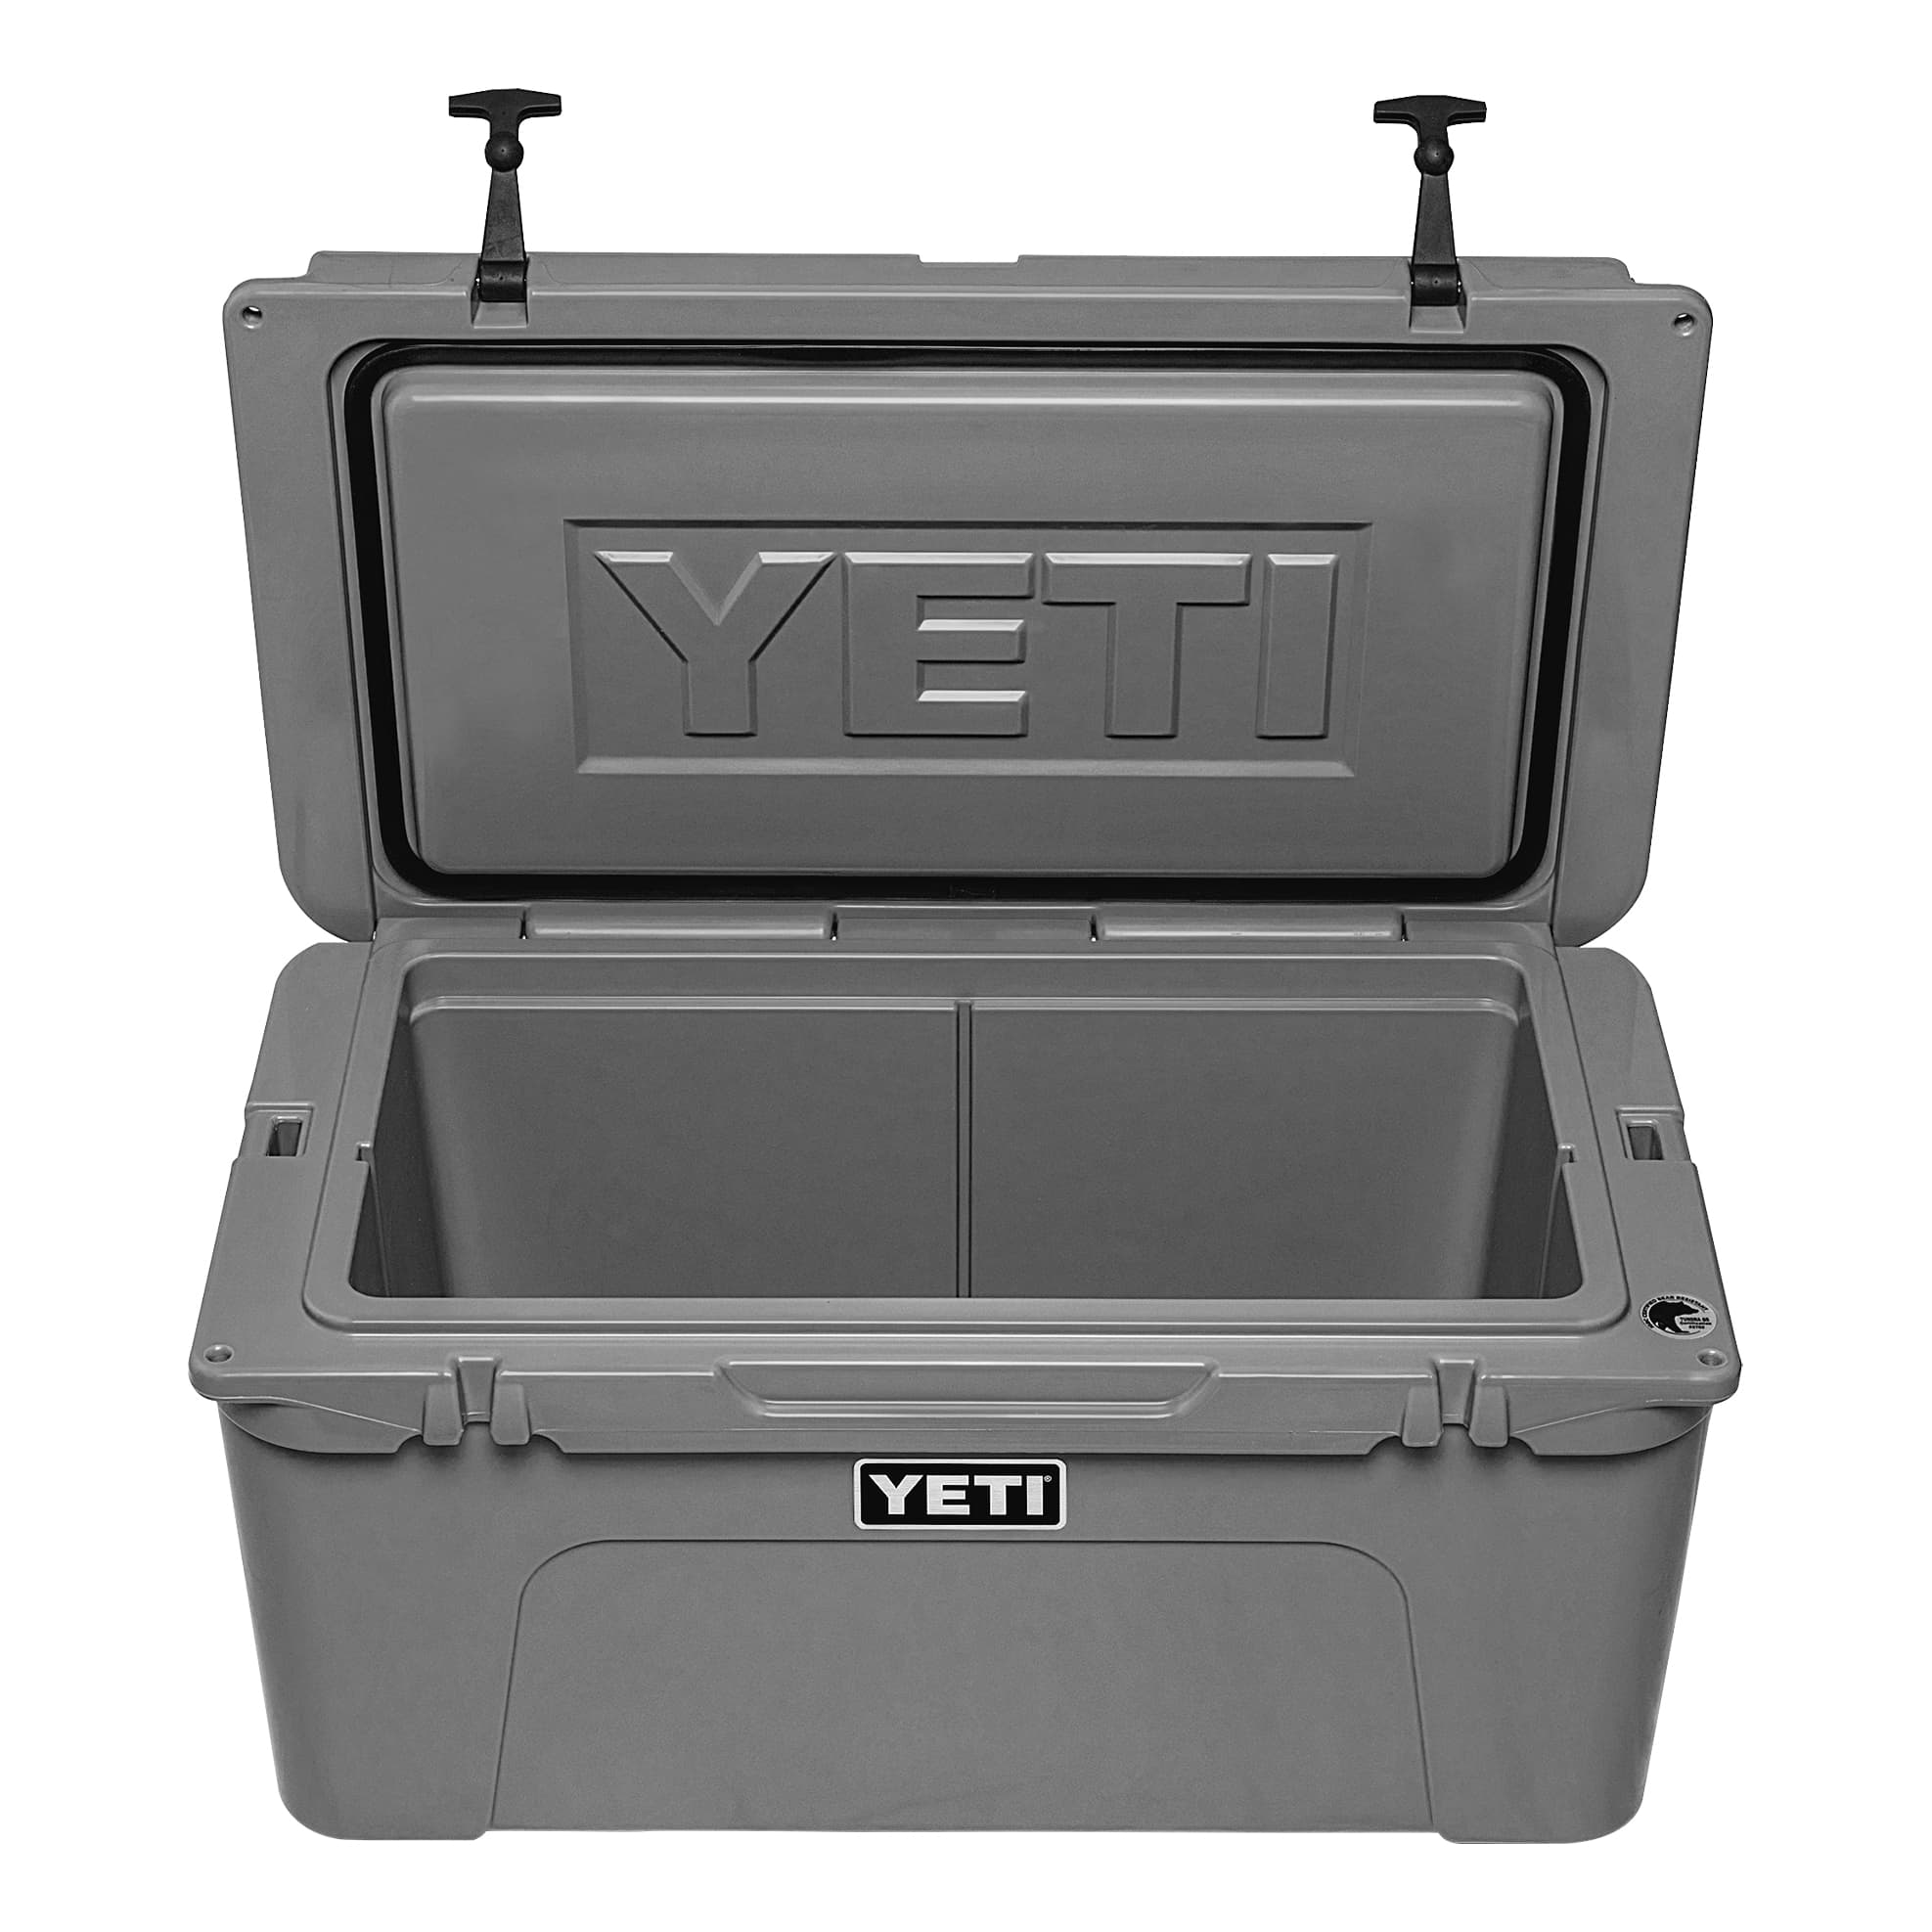 YETI® Tundra 65 Cooler - Charcoal - Open View